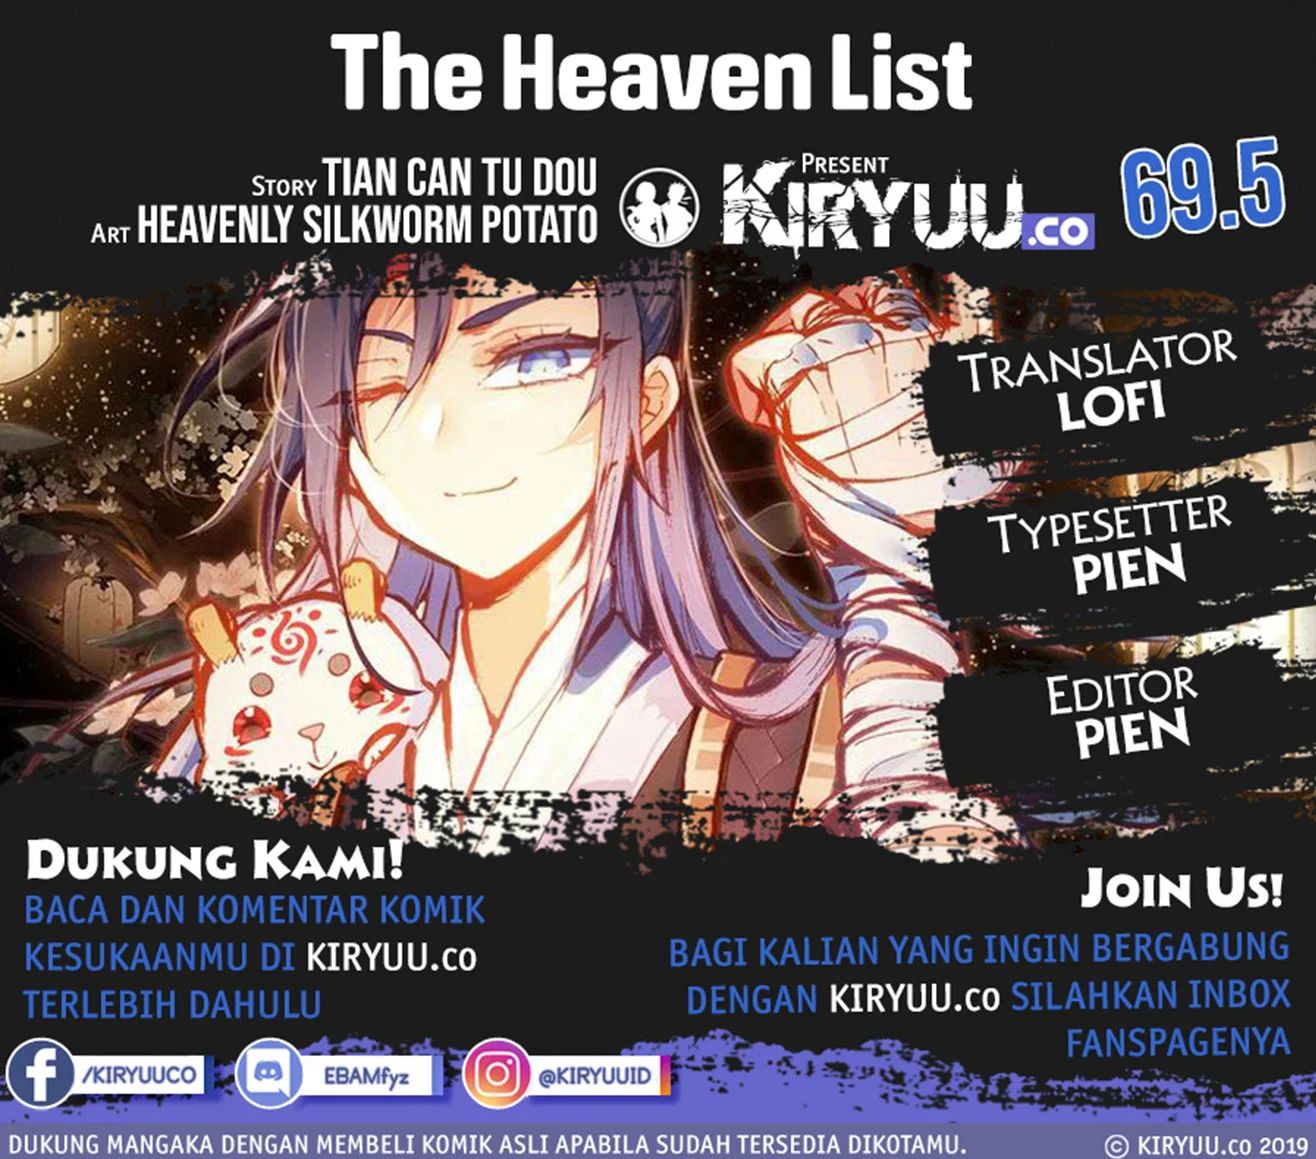 The Heaven’s List Chapter 69.5